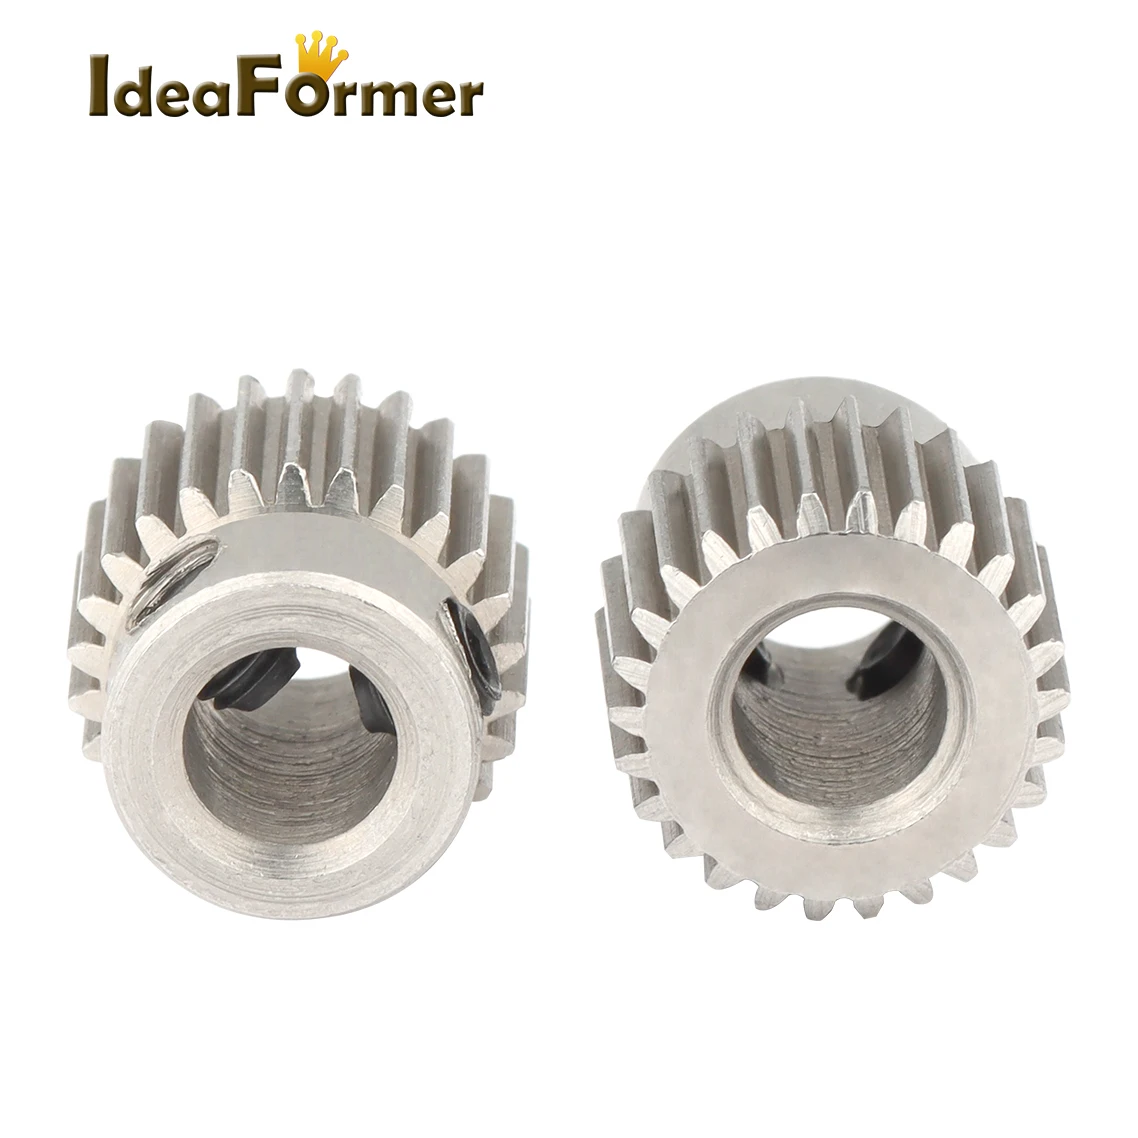 1Pc 26T Printer 26tooth Gear 11mm x 11mm For DIY New 3D Printer Extruder TDCA 